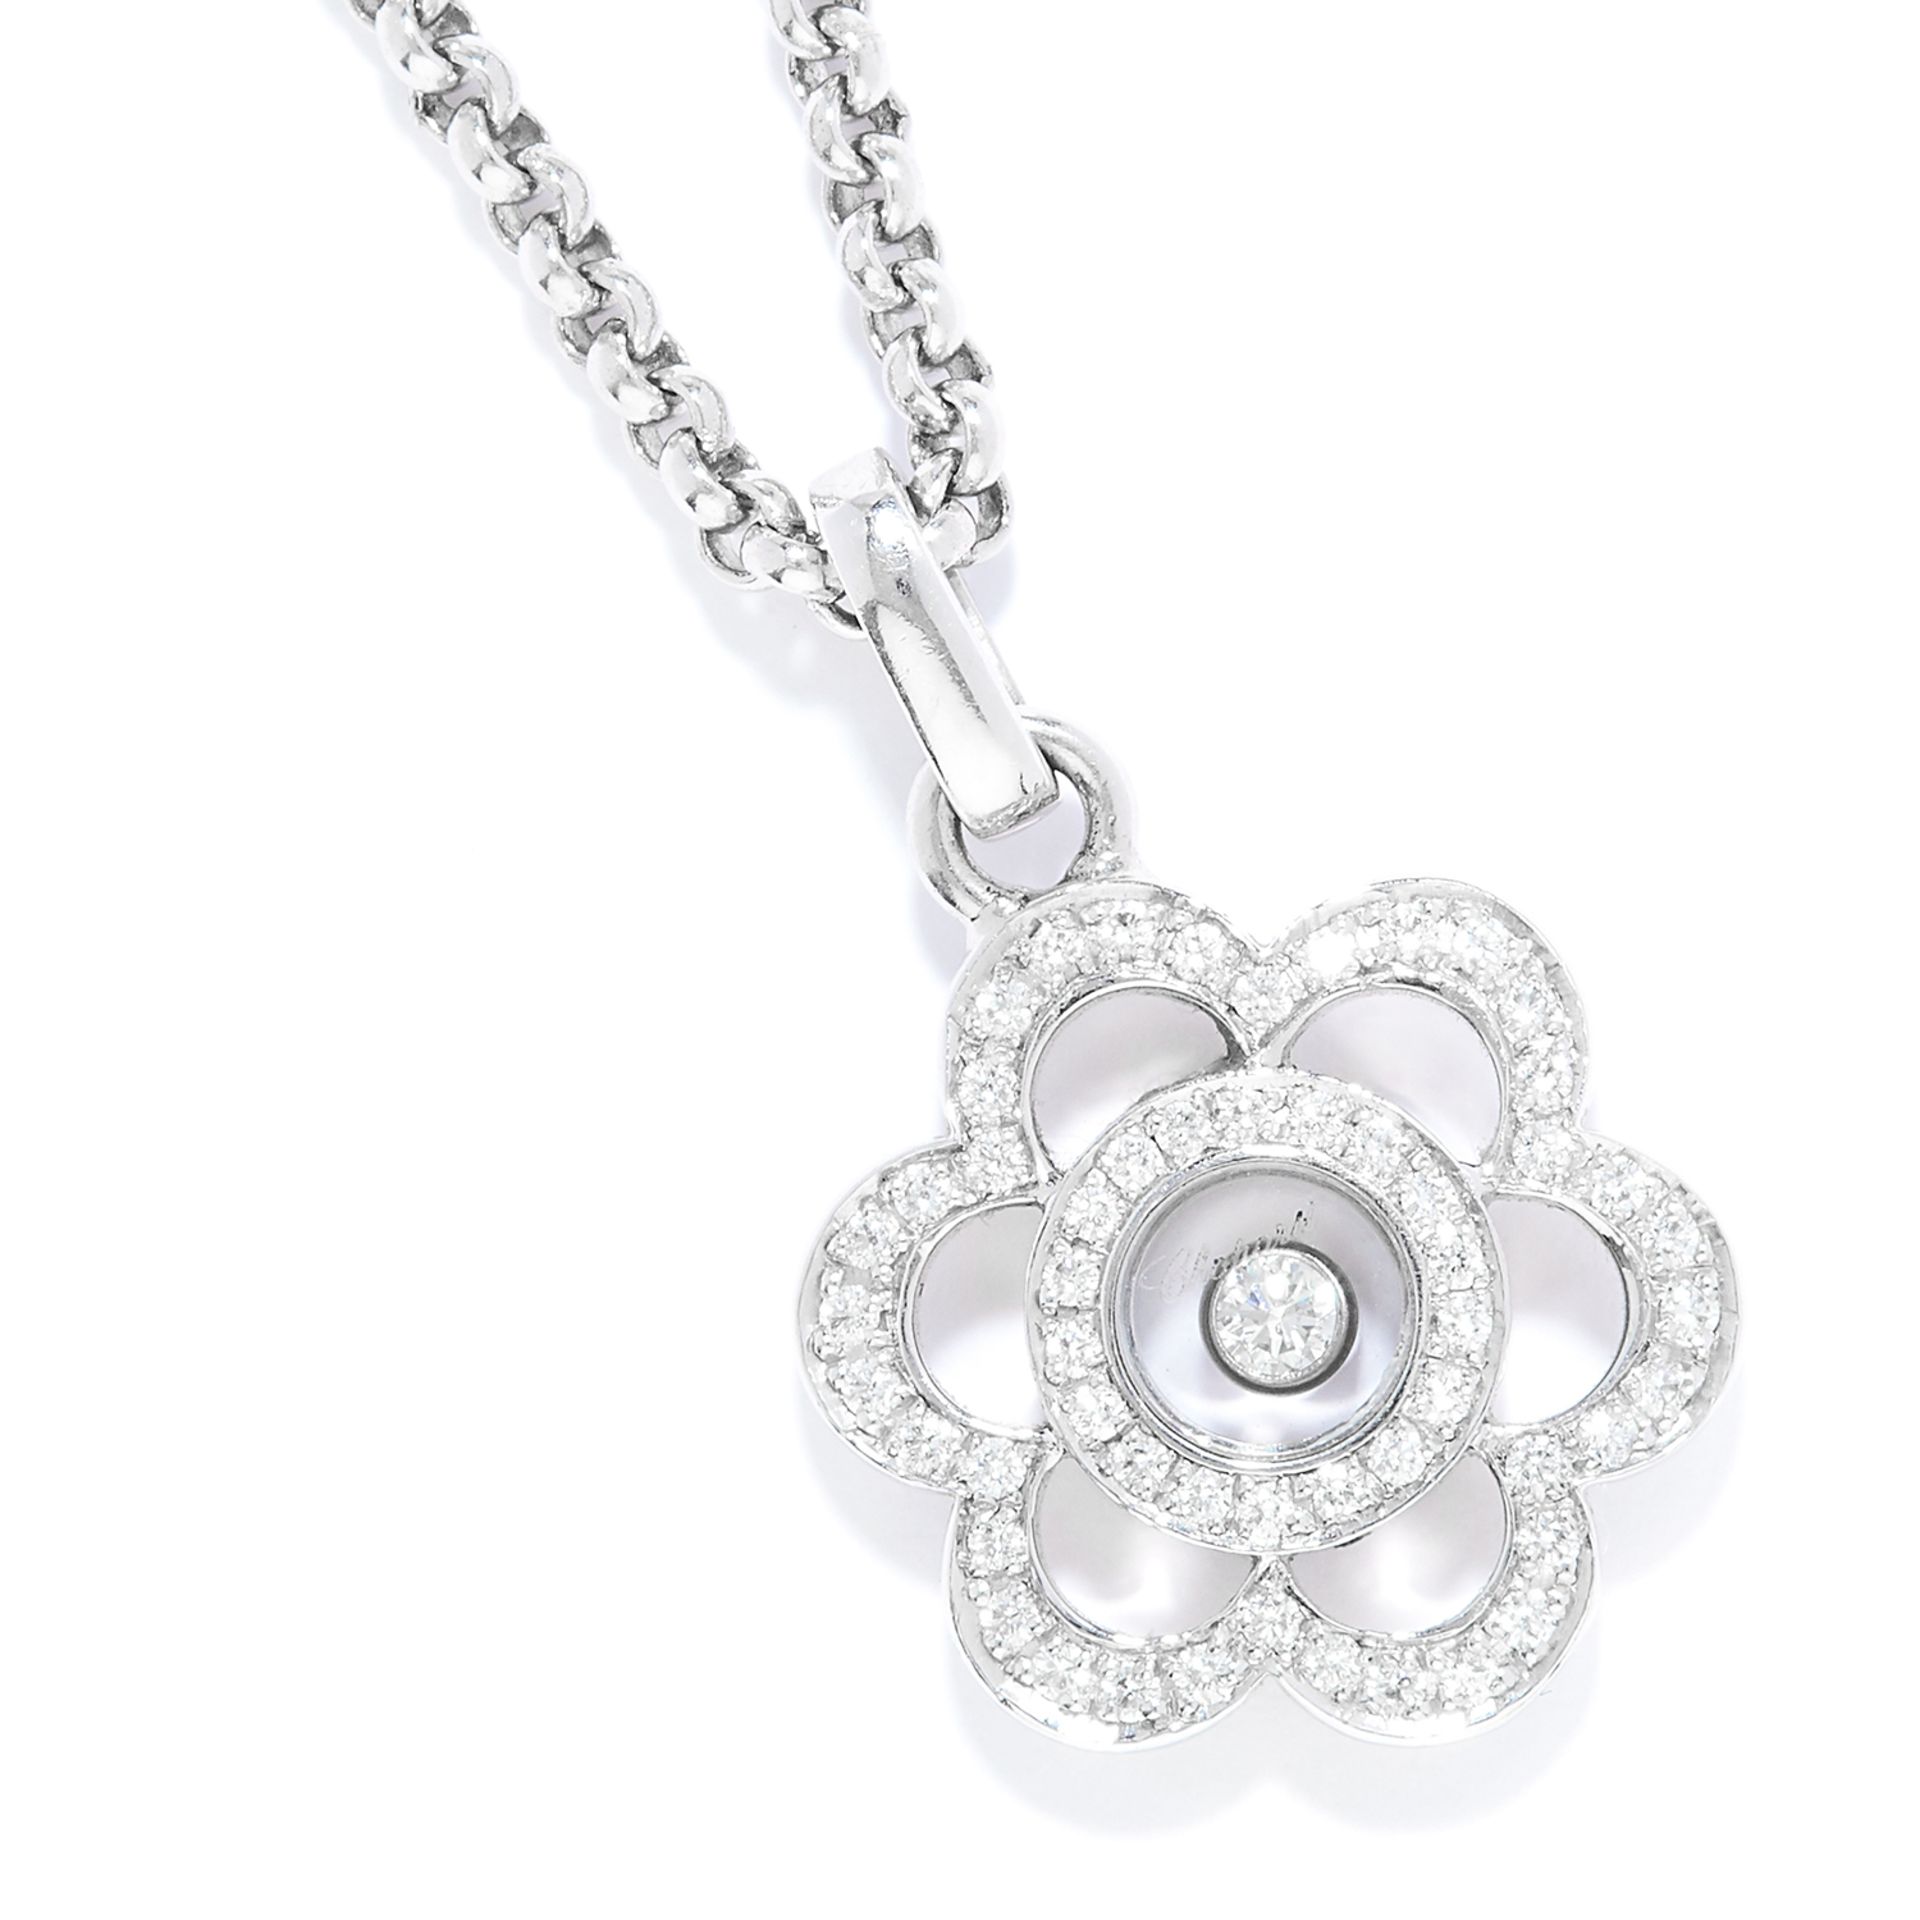 HAPPY DIAMOND PENDANT, CHOPPARD in 18ct white gold, depicting a flower set with round cut